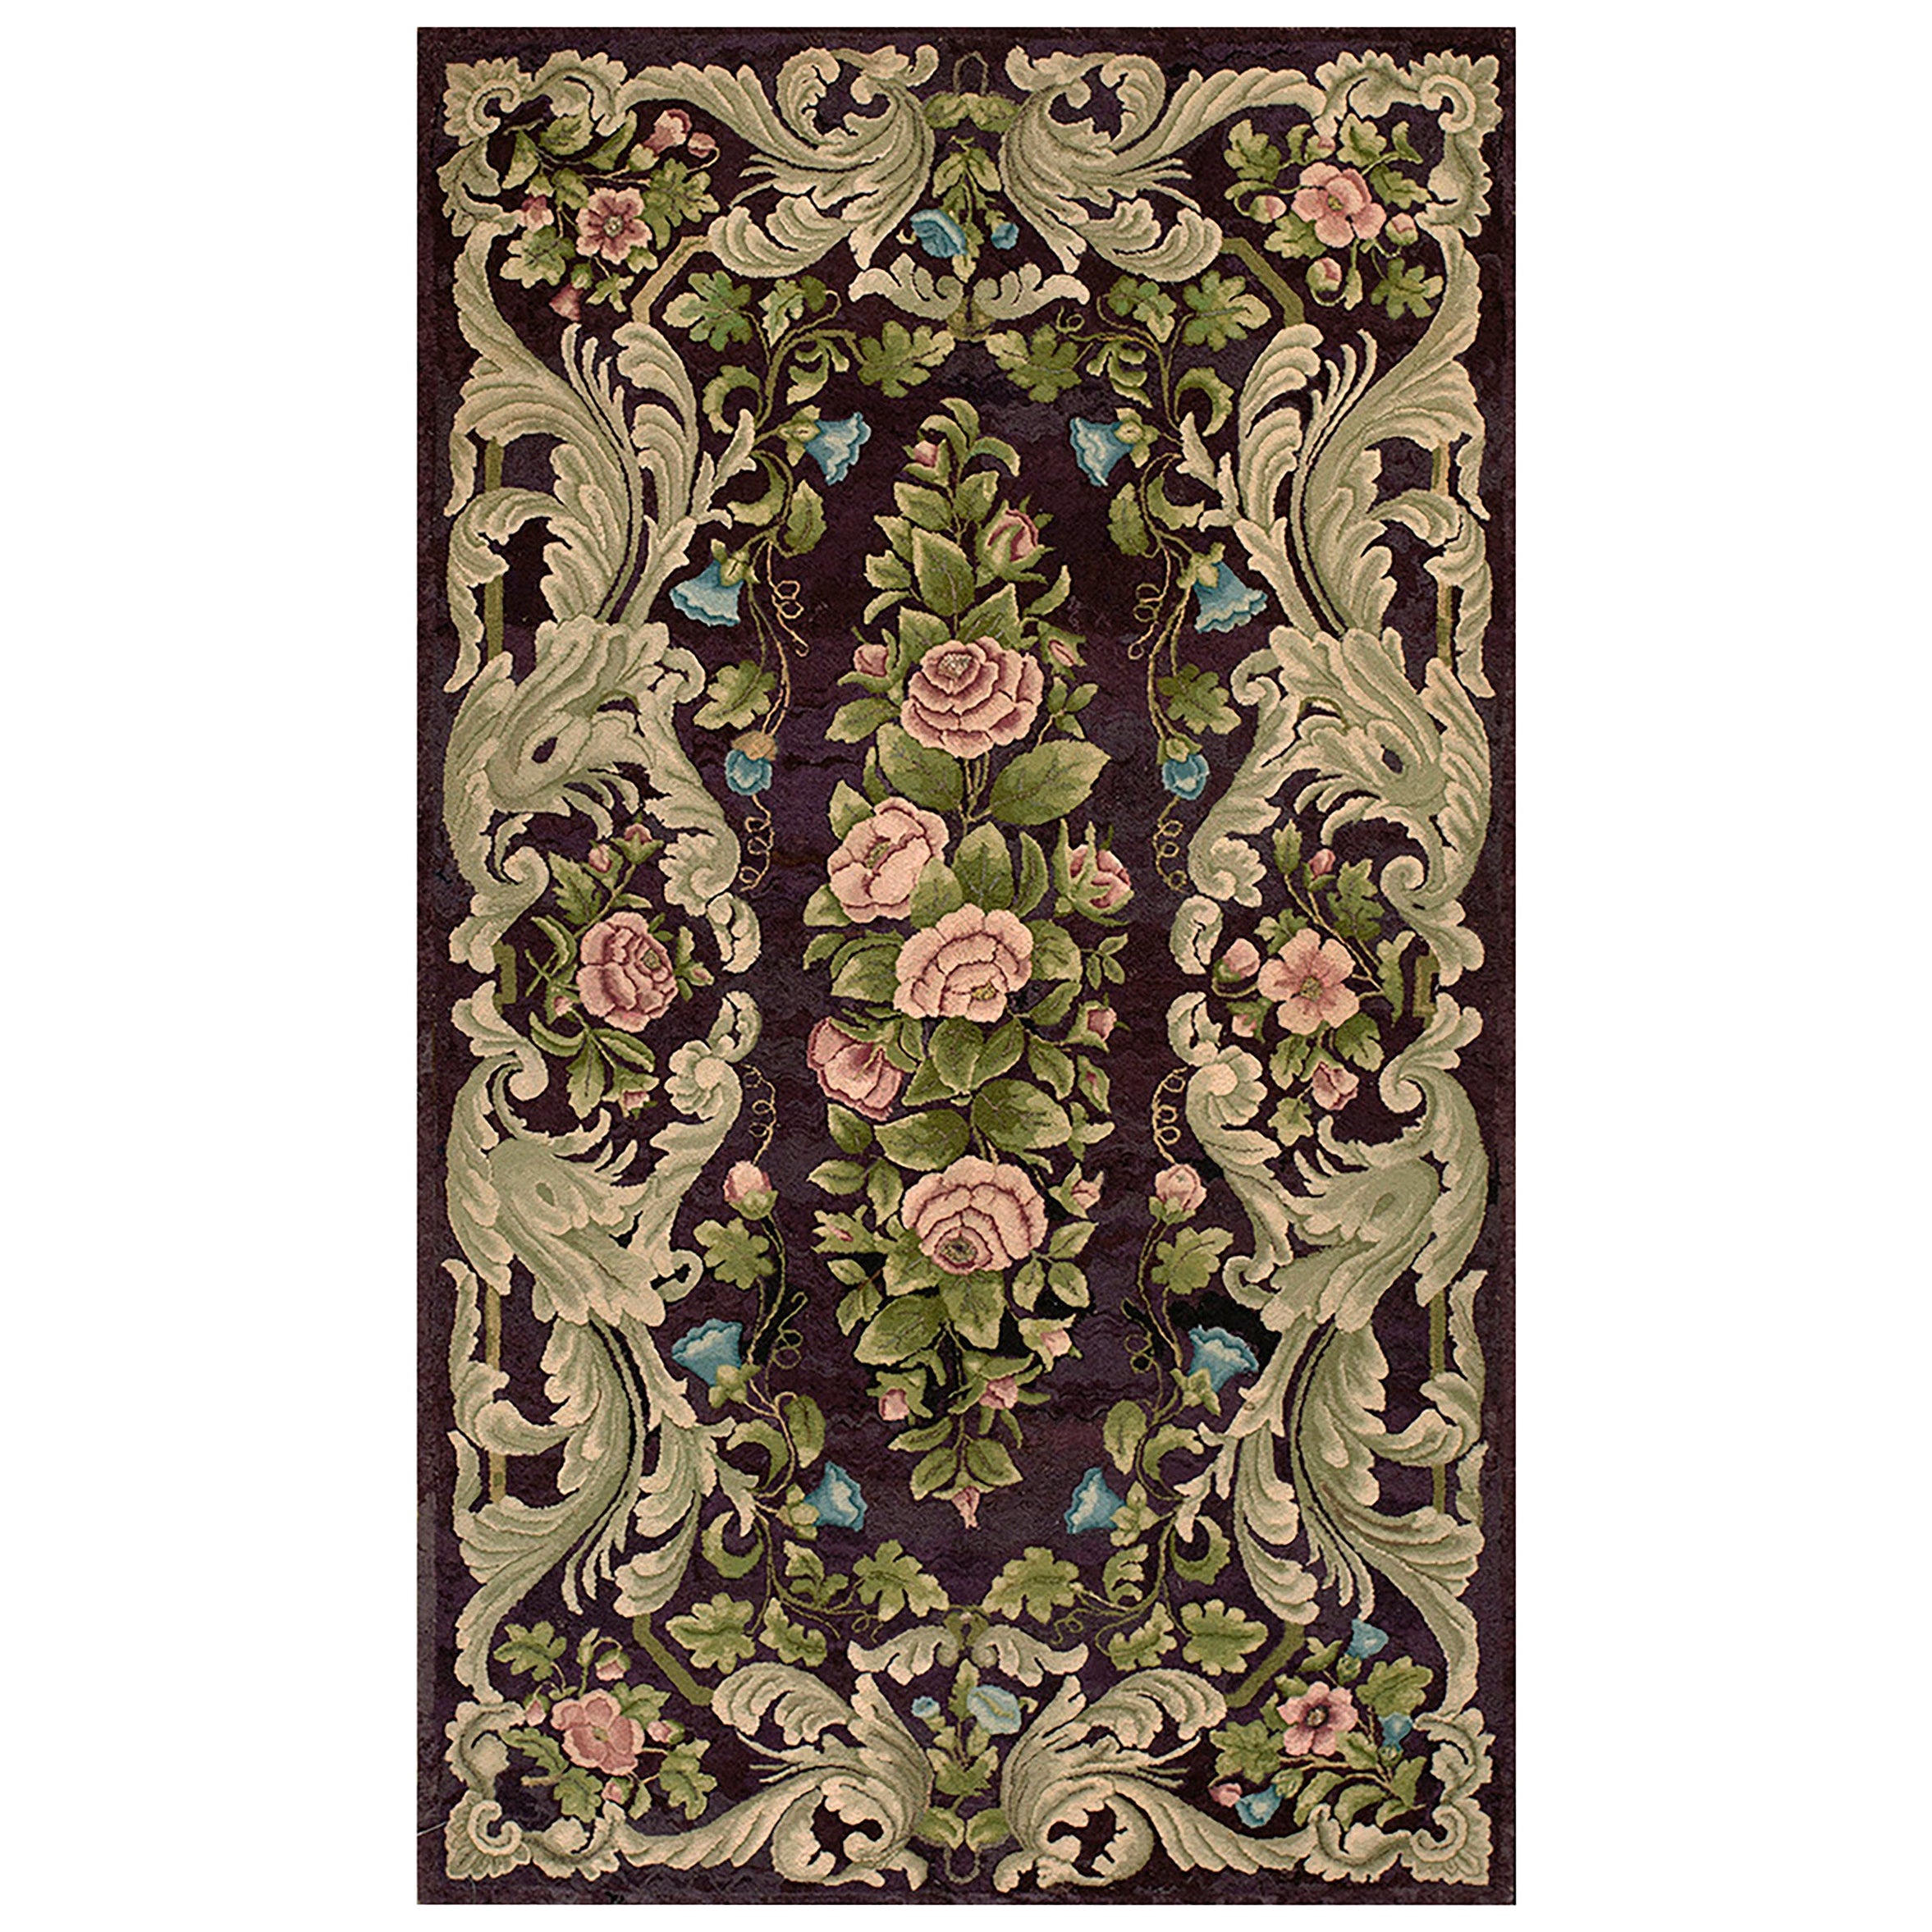 Early 20th Century American Hooked Rug ( 4' x 6'2'' - 122 x 188 cm ) 